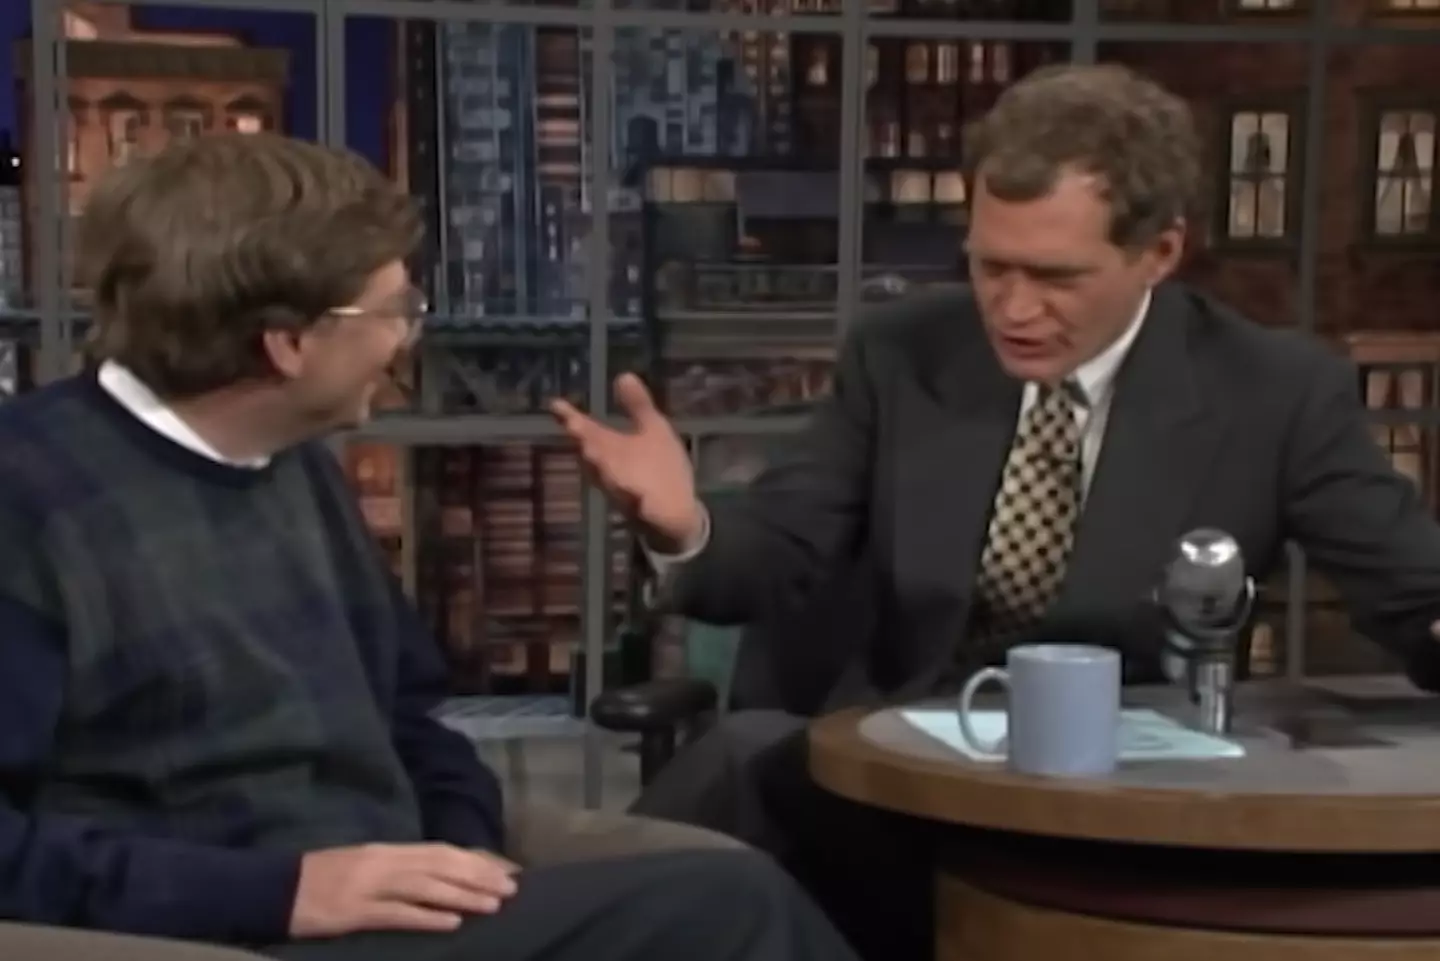 Letterman questioned the point of the internet when there were already radios.